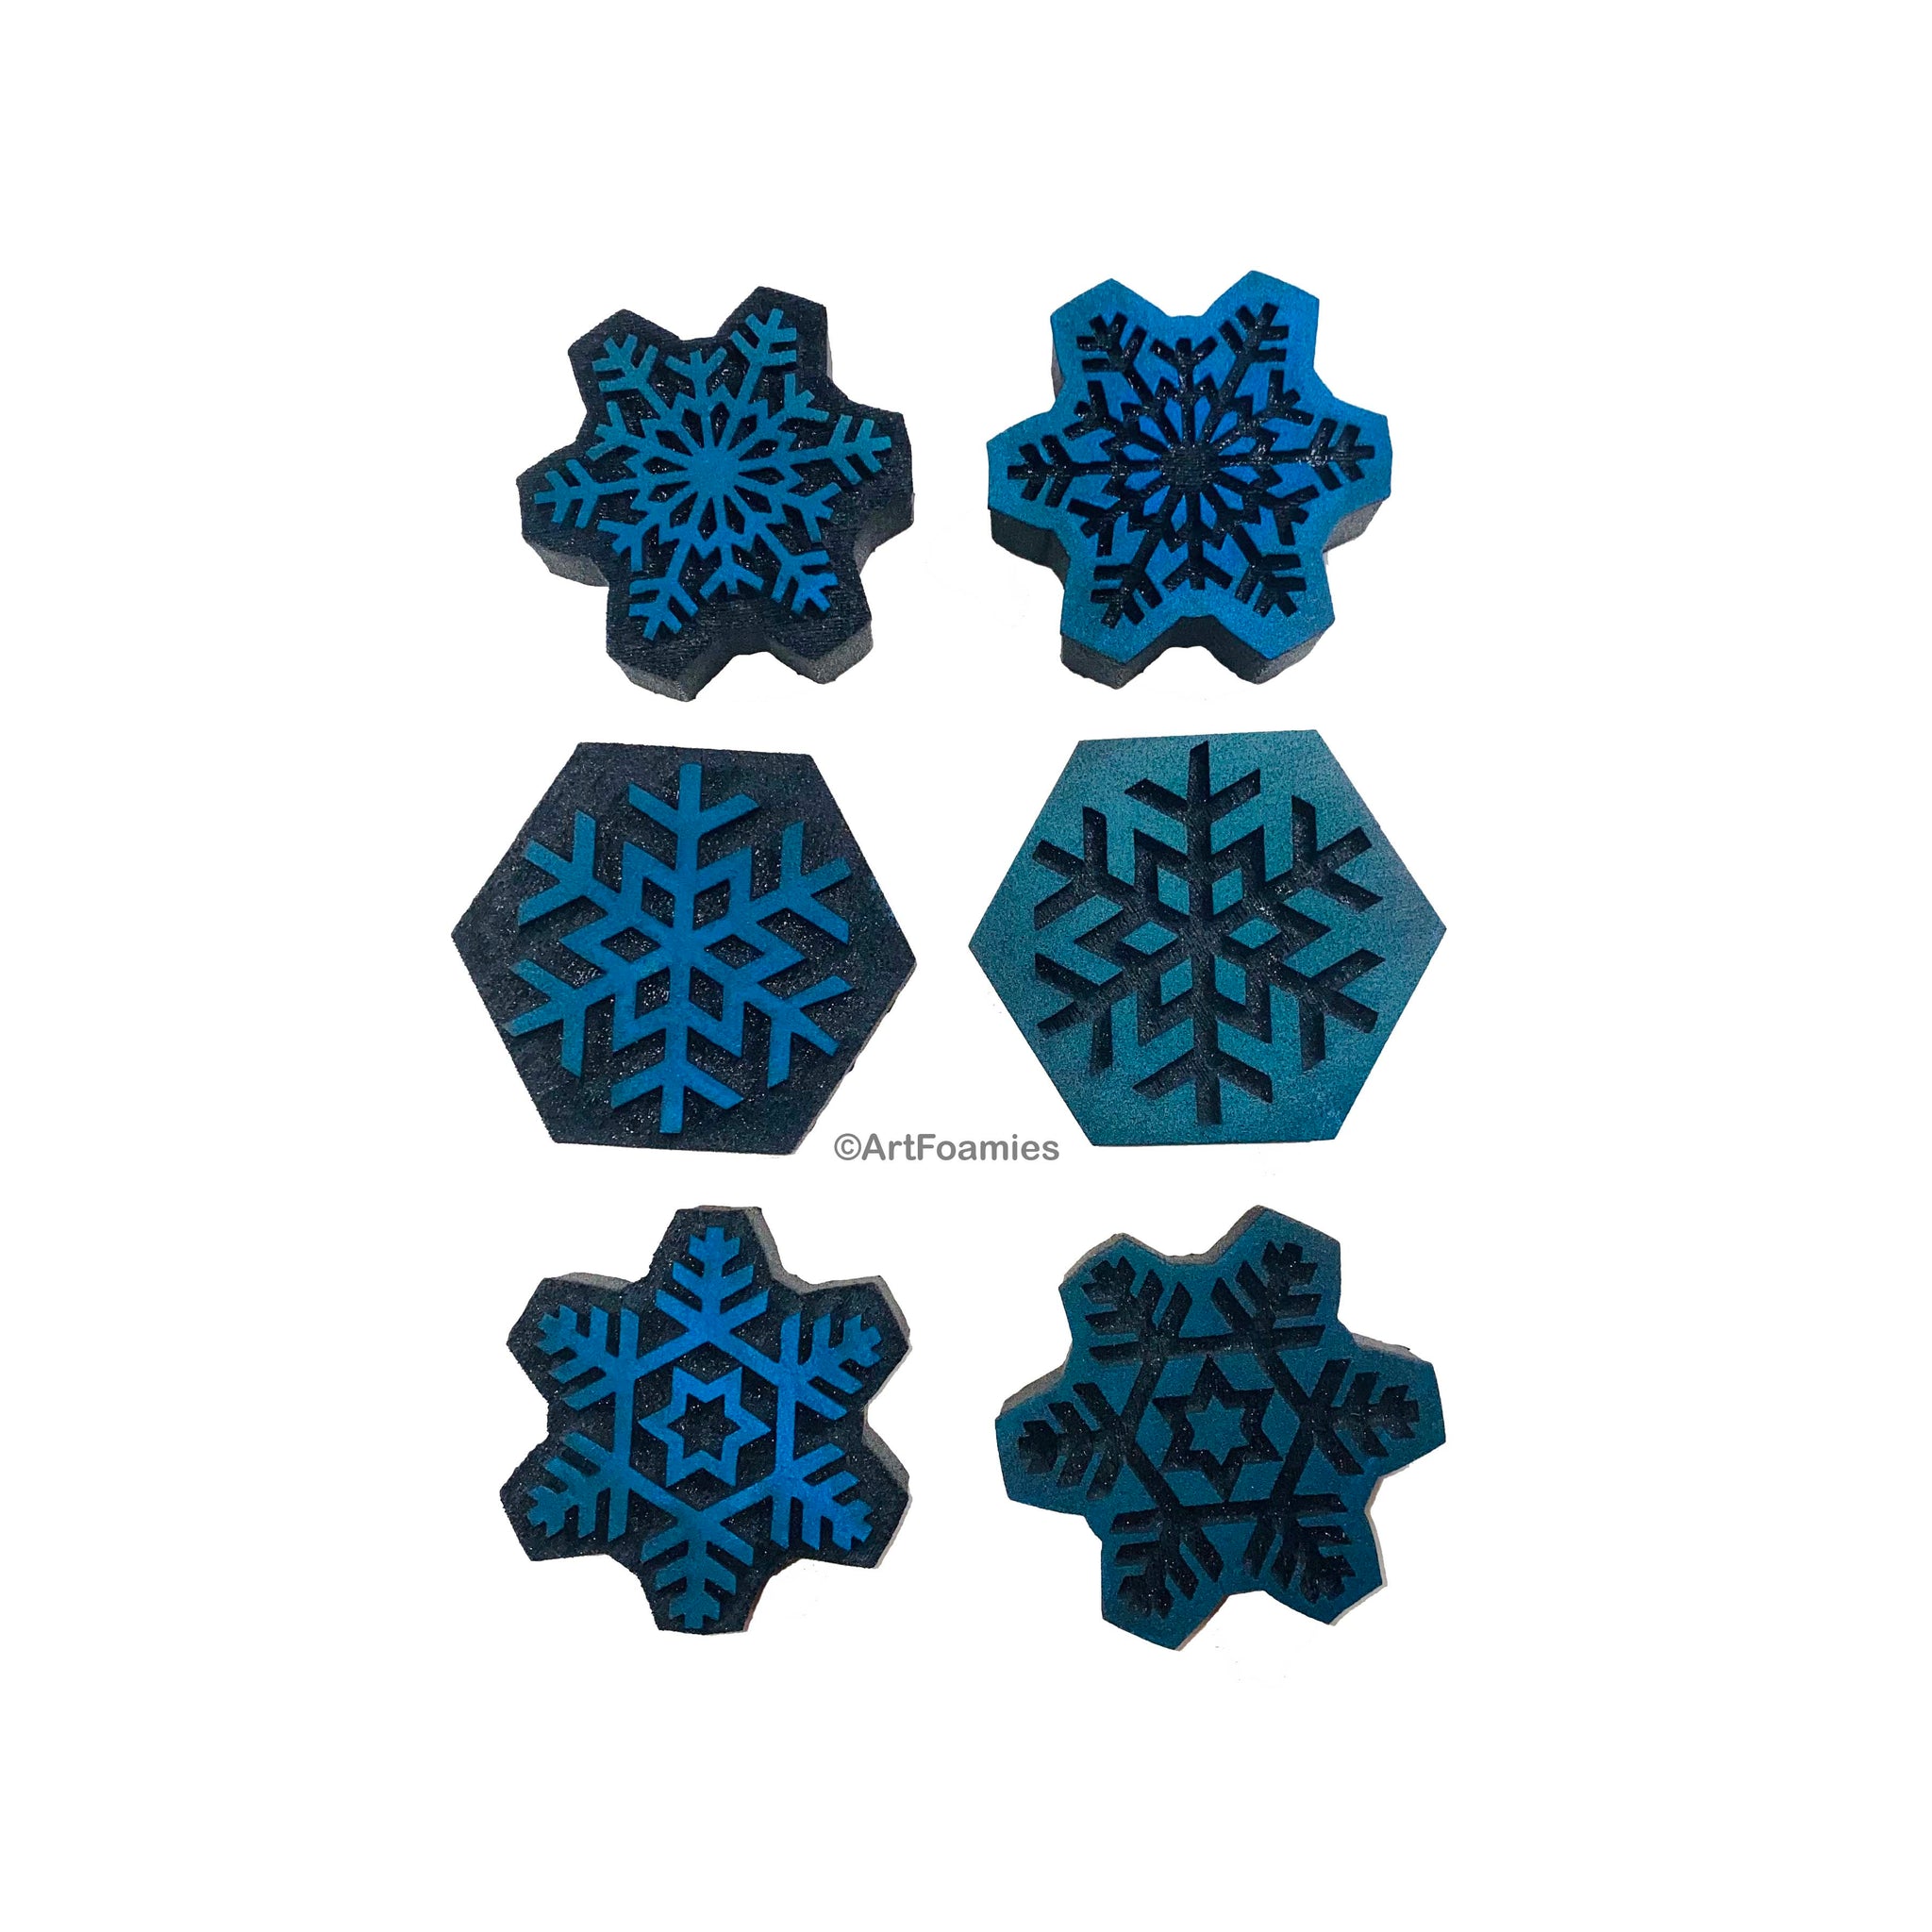 Designs by Gina H. | Snowflakes | Foam Stamps - Set of 6